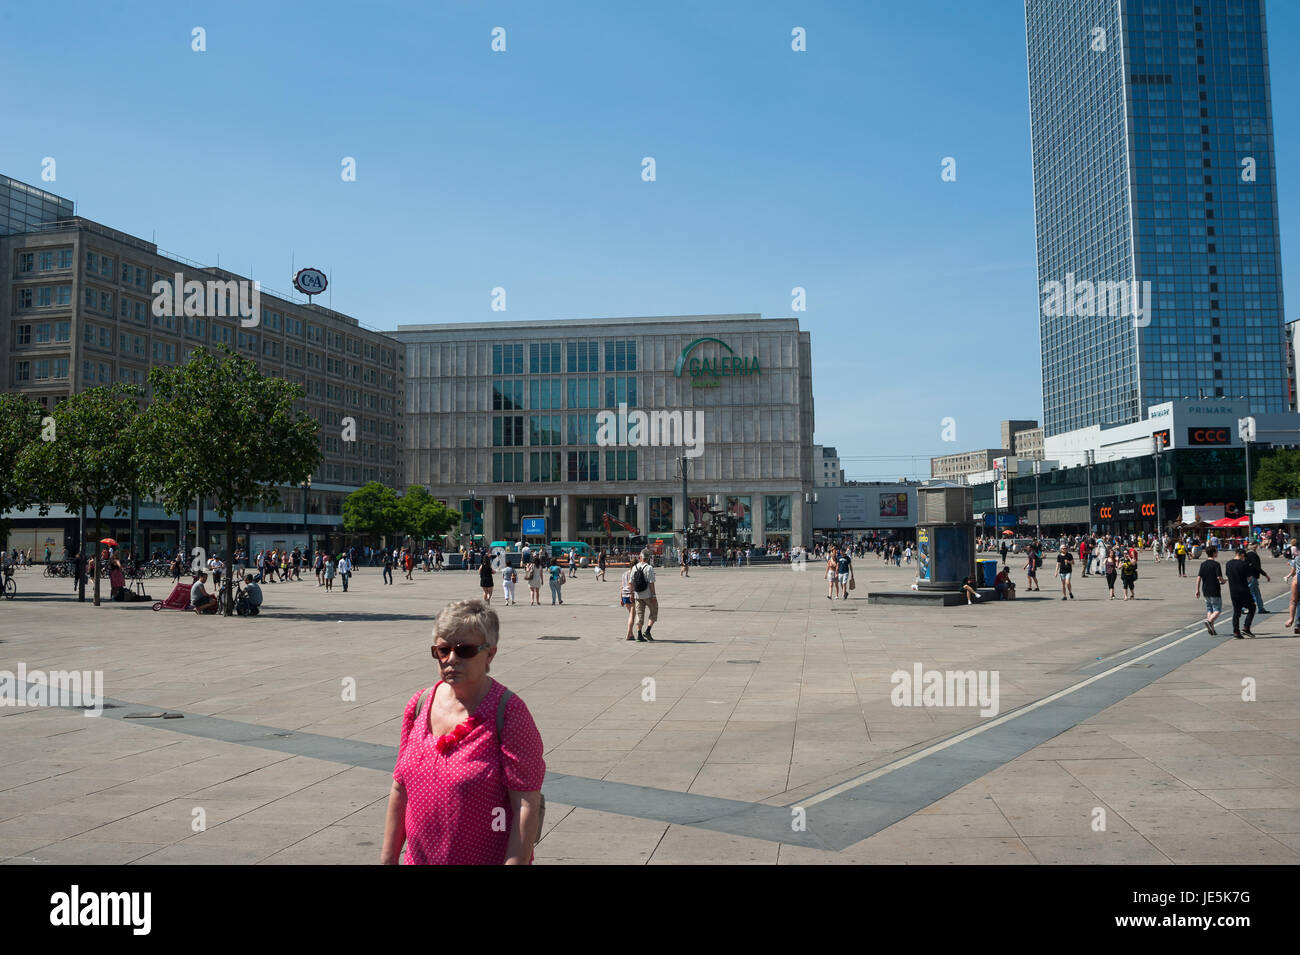 29.05.2017, Berlin, Germany, Europe - A view of the Alexanderplatz Square in Berlin Mitte with the Berolina House and the Park Inn Hotel. Stock Photo